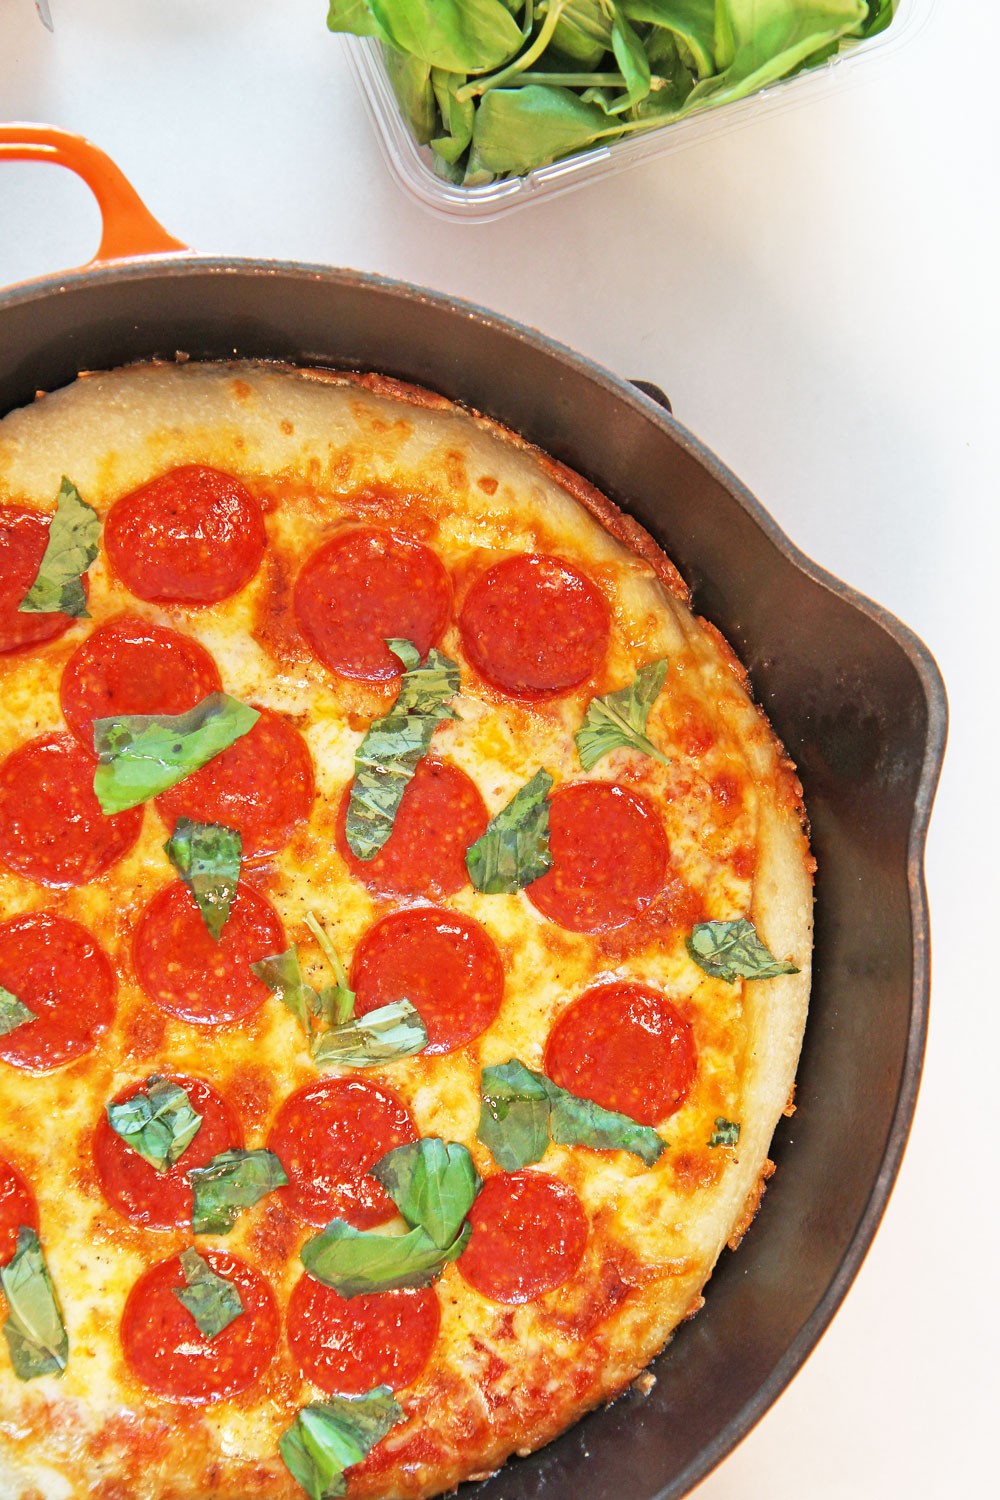 How to Make Pizza in a Cast Iron Pan. This is super easy. Just get pizza dough, marinara, mozzarella cheese, pepperoni, and basil. Pizza making is so easy and this tastes just like NYC pizza. Happy cooking! www.ChopHappy.com #howtomakepizza #pizza